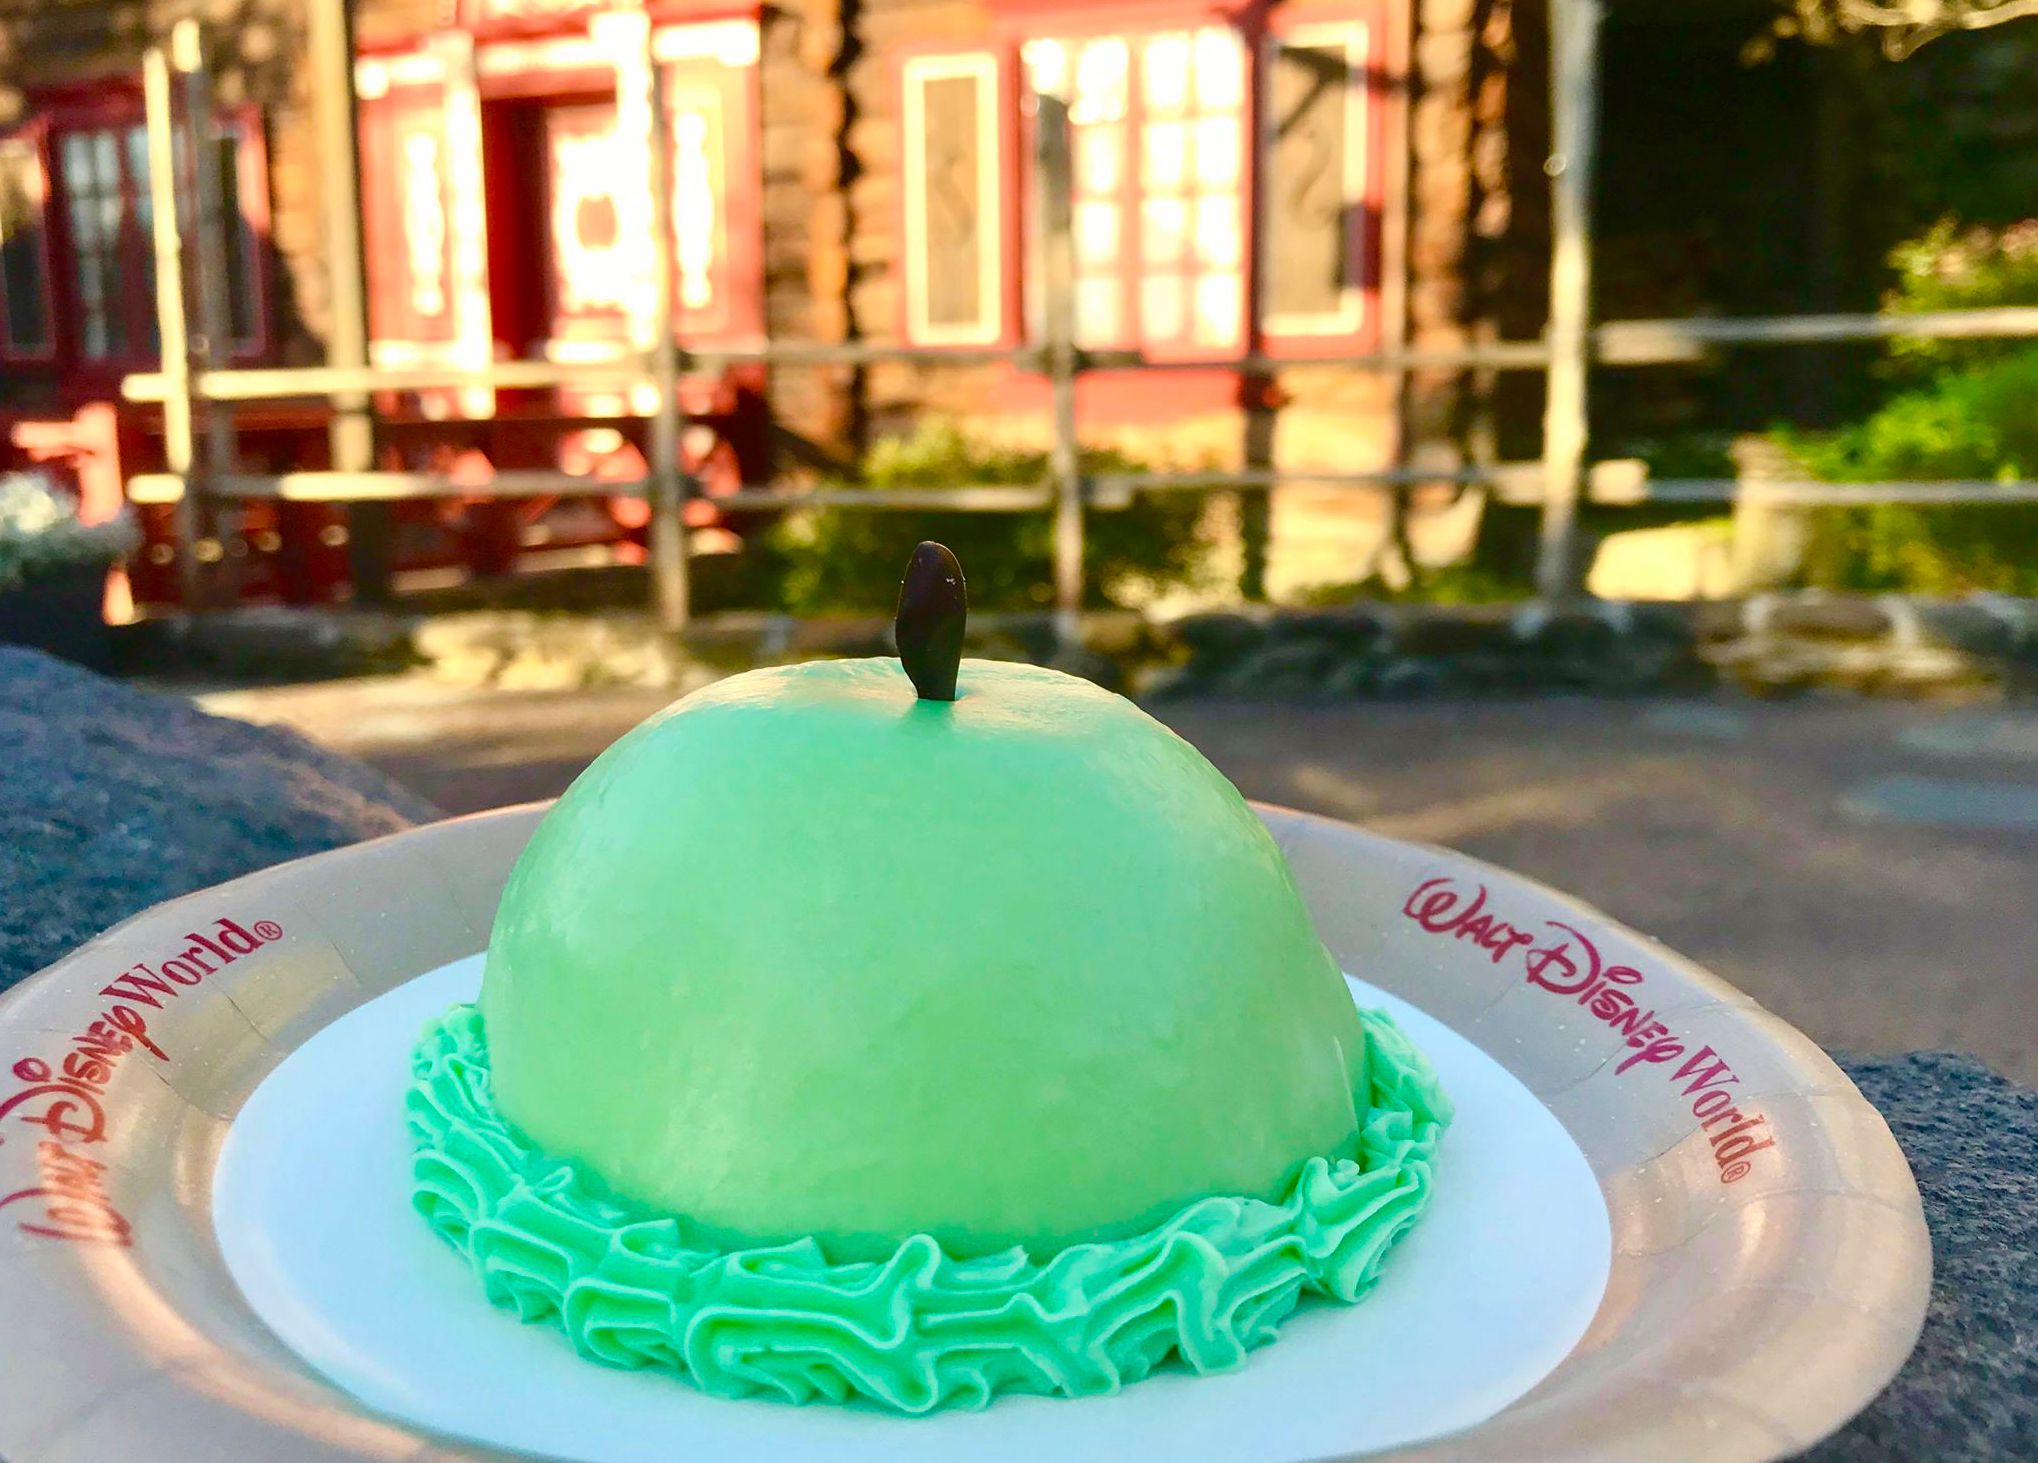 Sven’s Apple Cheesecake Arrives at Epcot